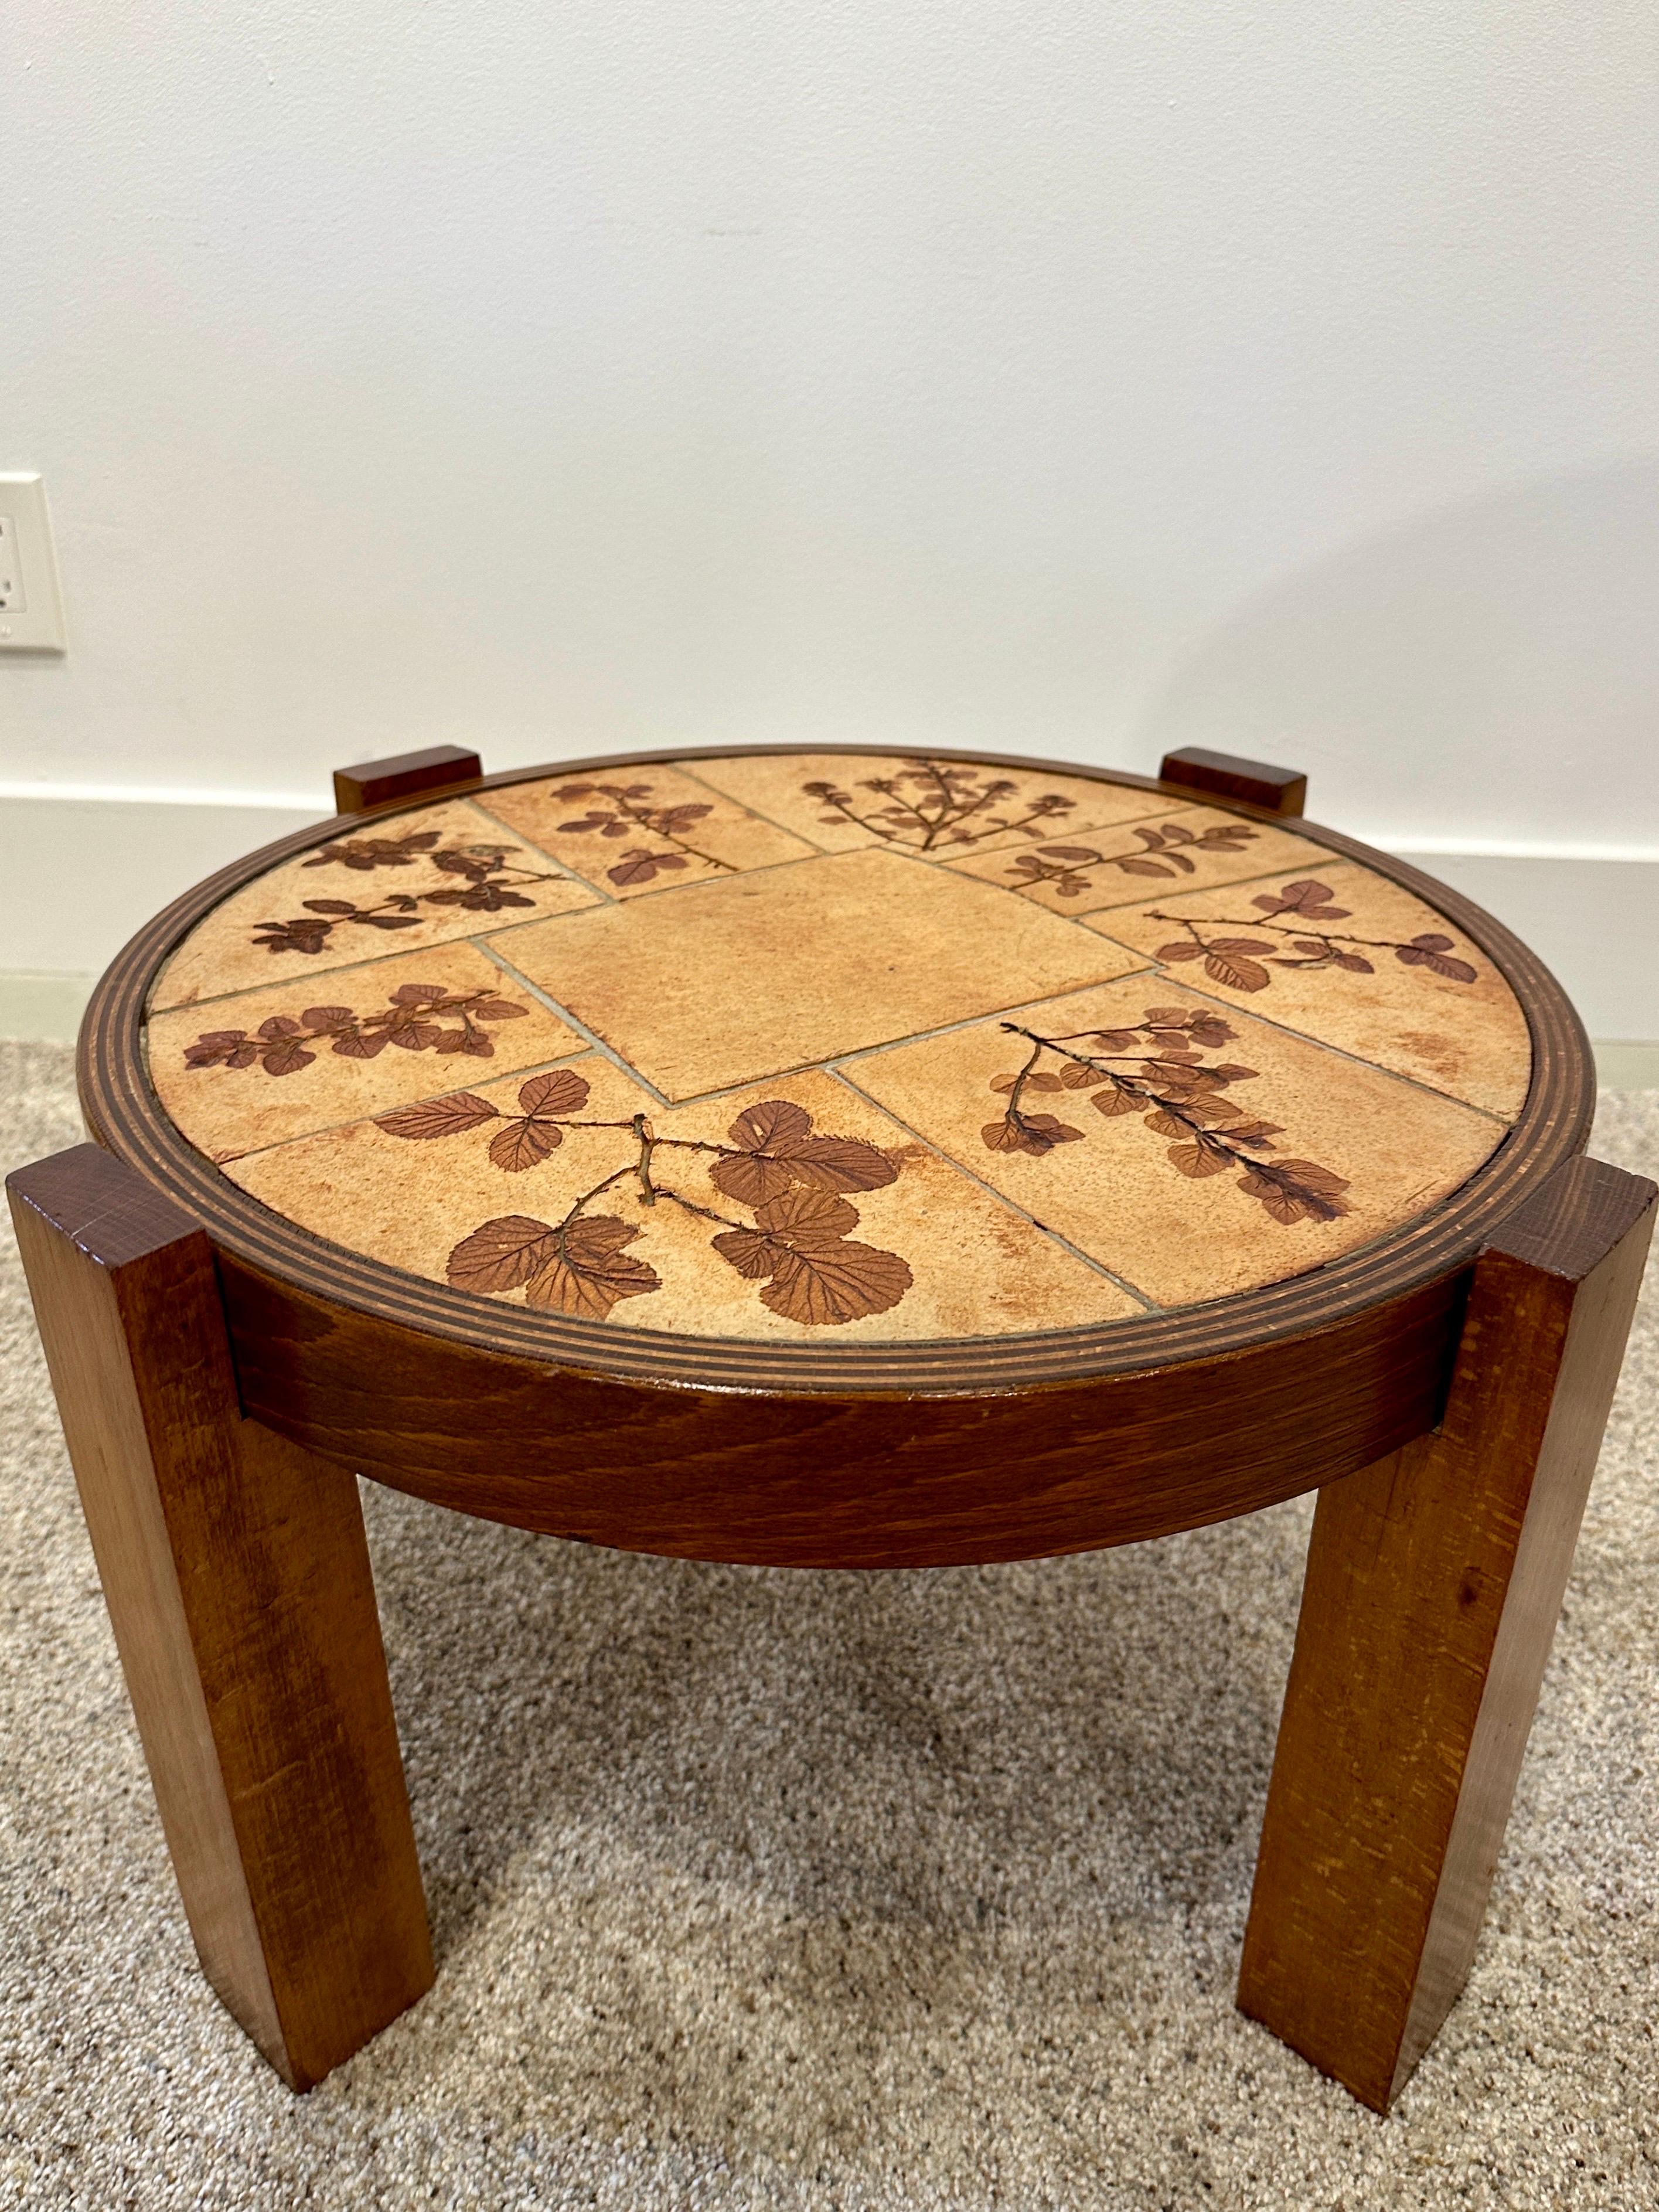 A  beautifully organic small scale round coffee/side table with a warm earth-tone ceramic top featuring pressed flowers embedded in to the ceramic plateau.  Natural oak wood base with simple ridges detailed around the top.  THIS ITEM IS LOCATED AND